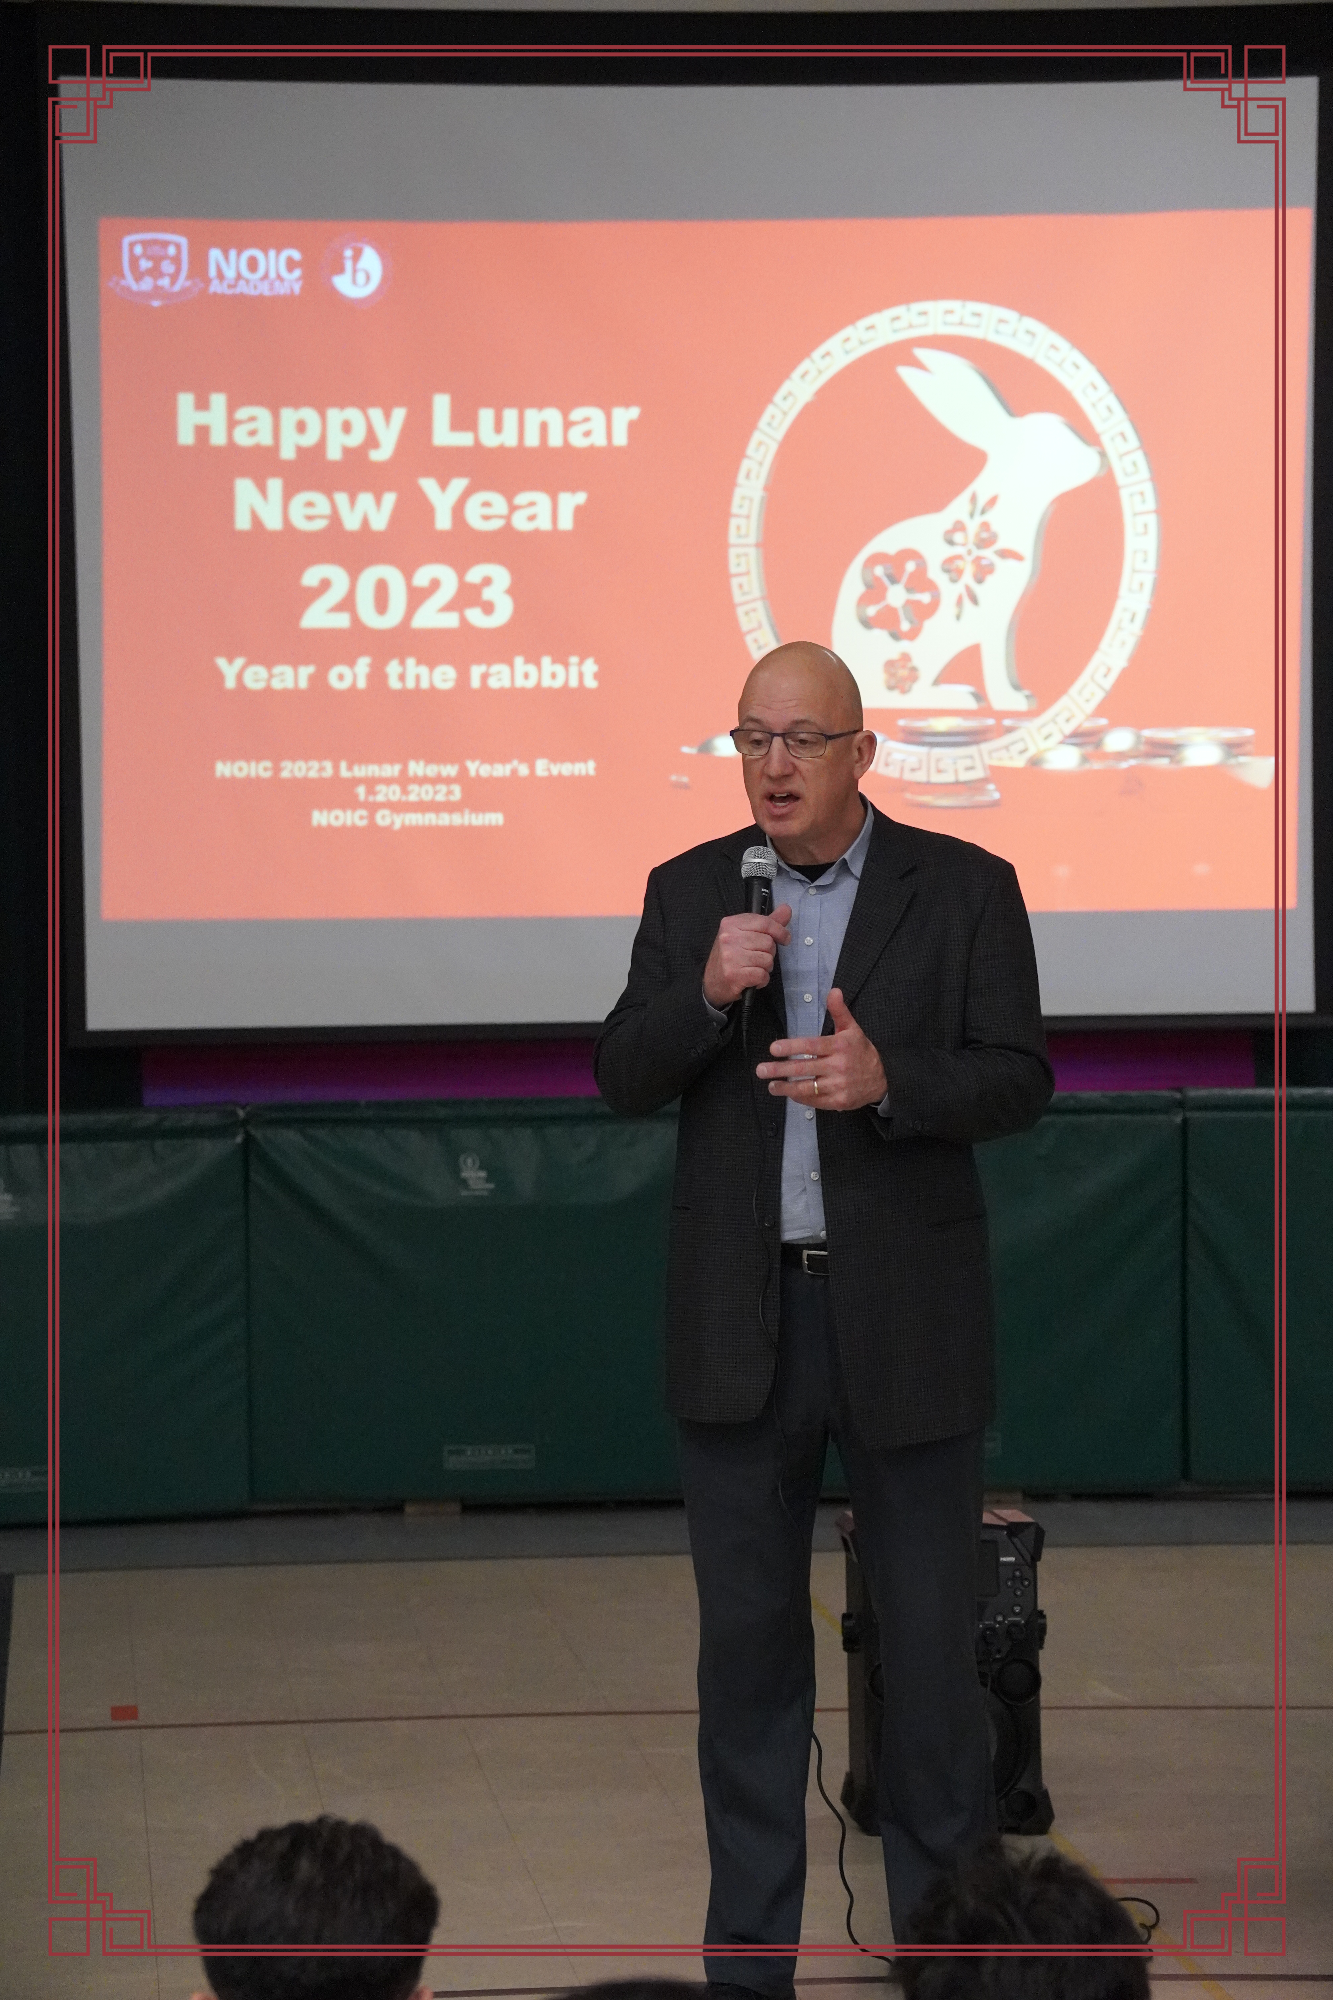 NOIC 2023 Lunar New Year Event